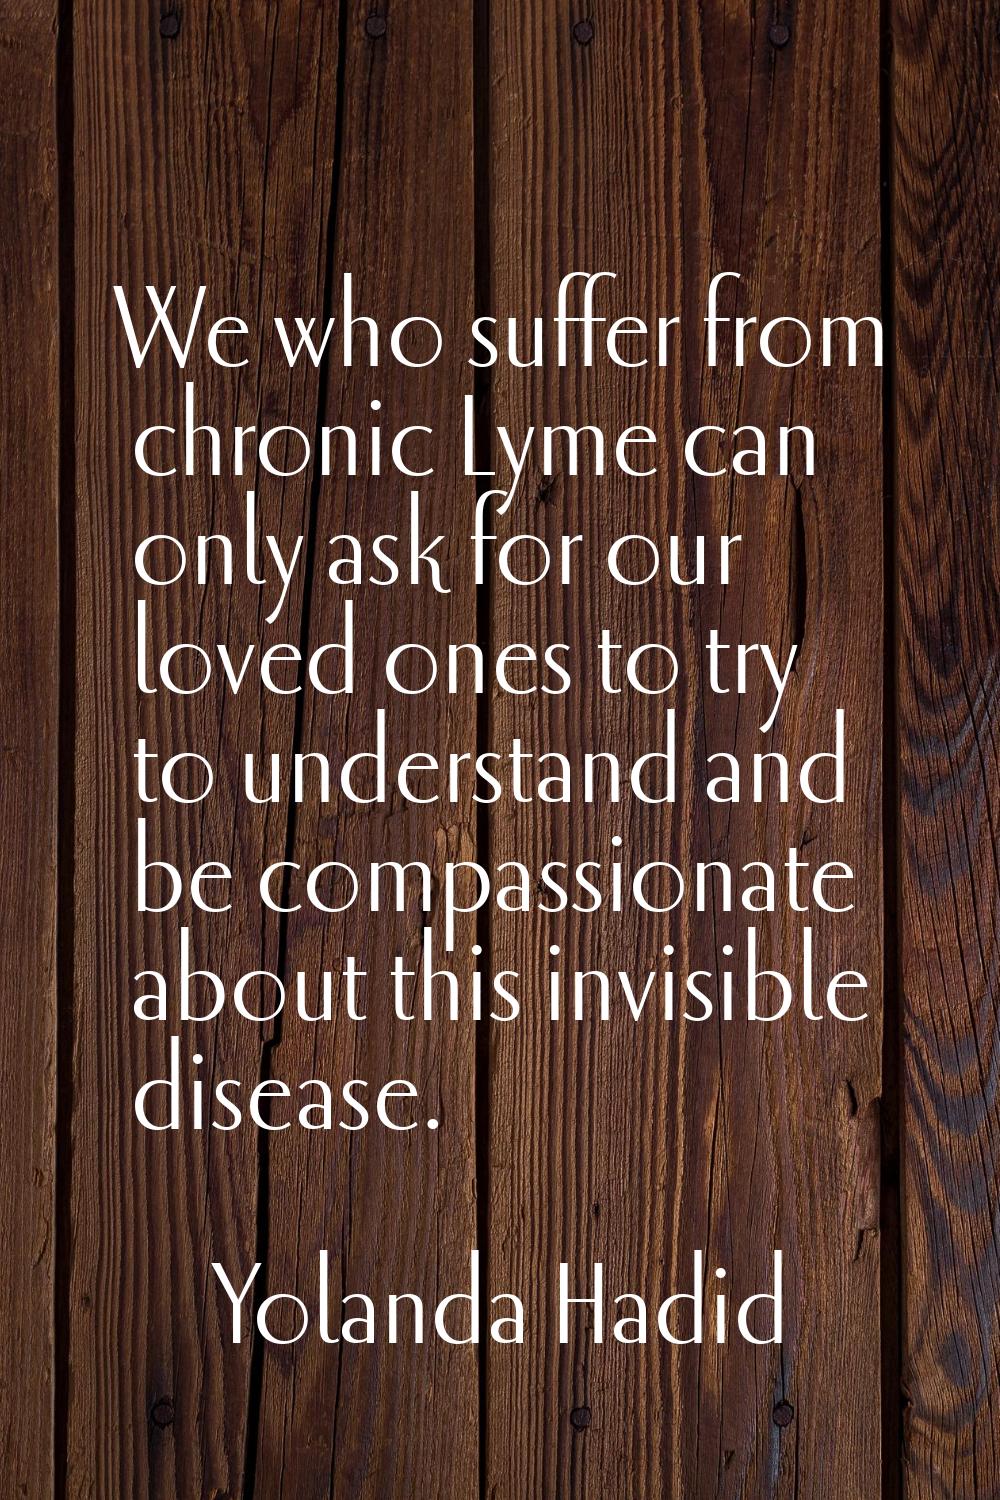 We who suffer from chronic Lyme can only ask for our loved ones to try to understand and be compass